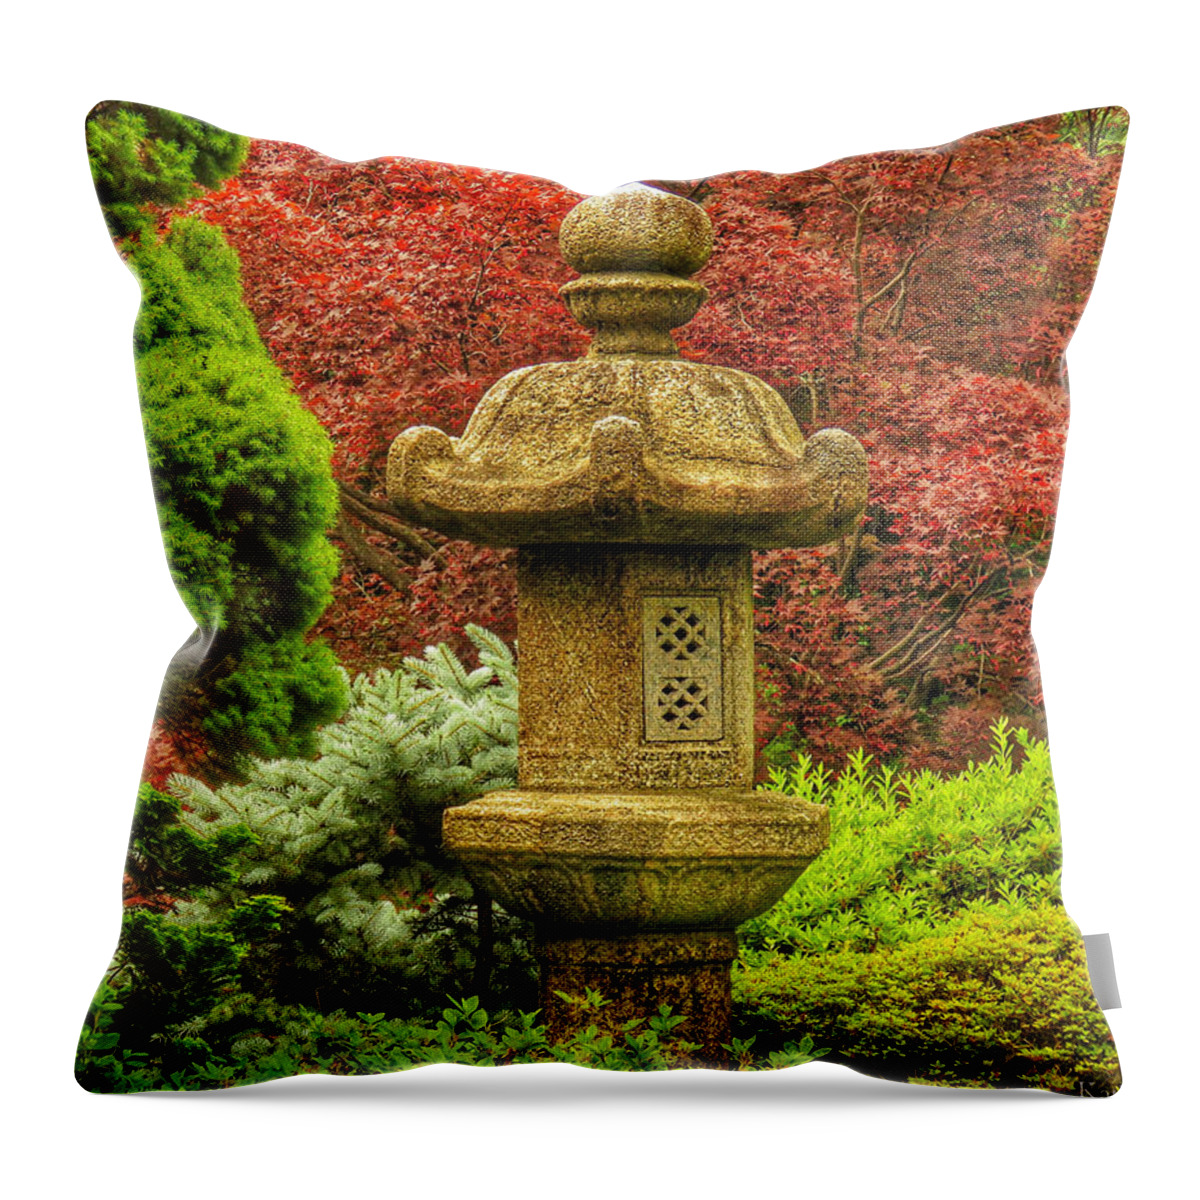 Bees Throw Pillow featuring the photograph Tea Garden by Kathi Isserman